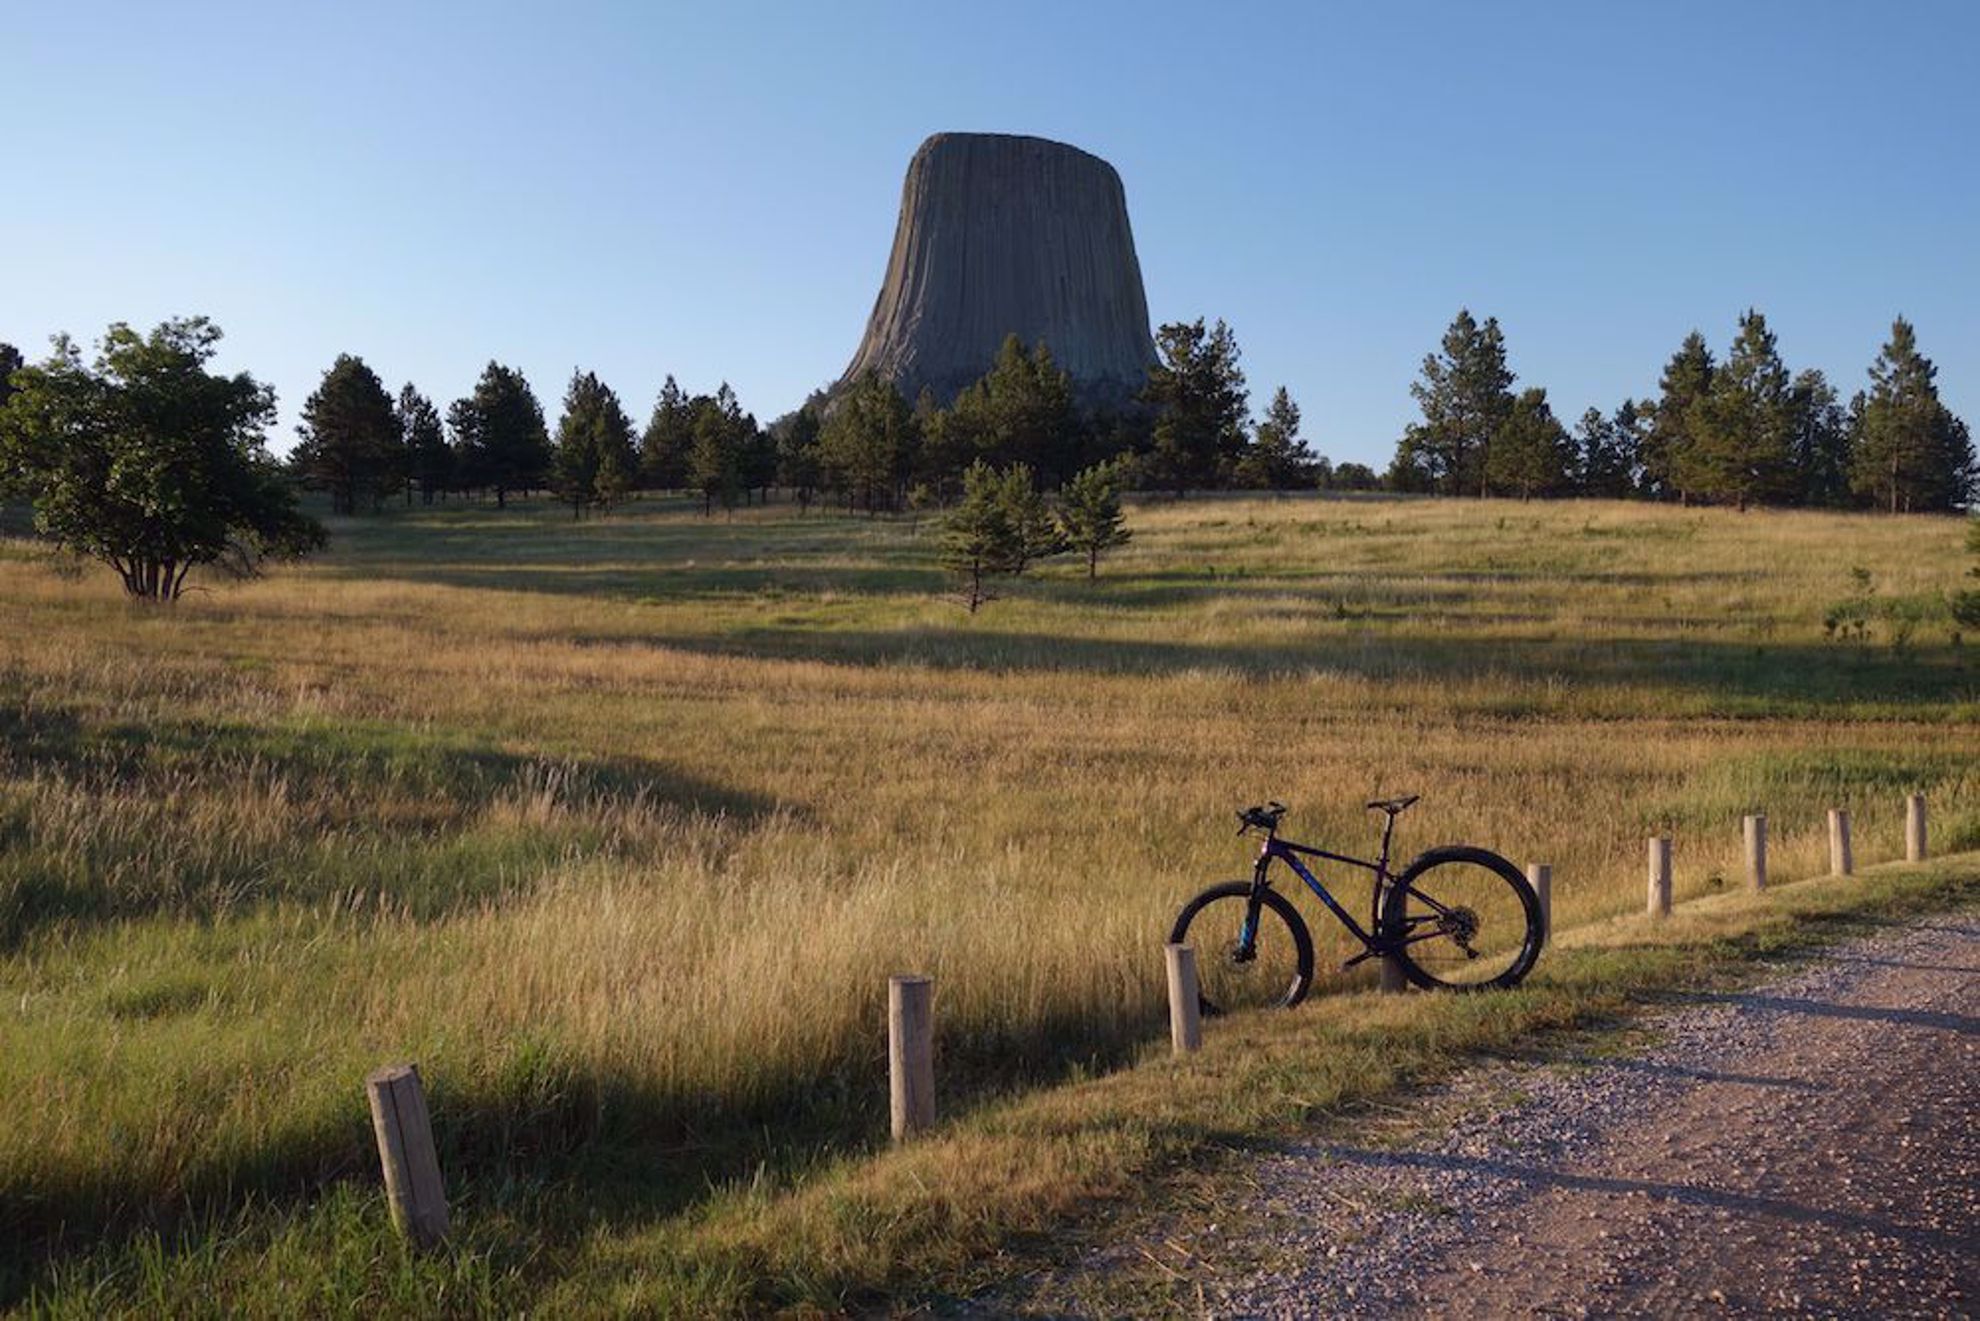 Devil's tower and bike